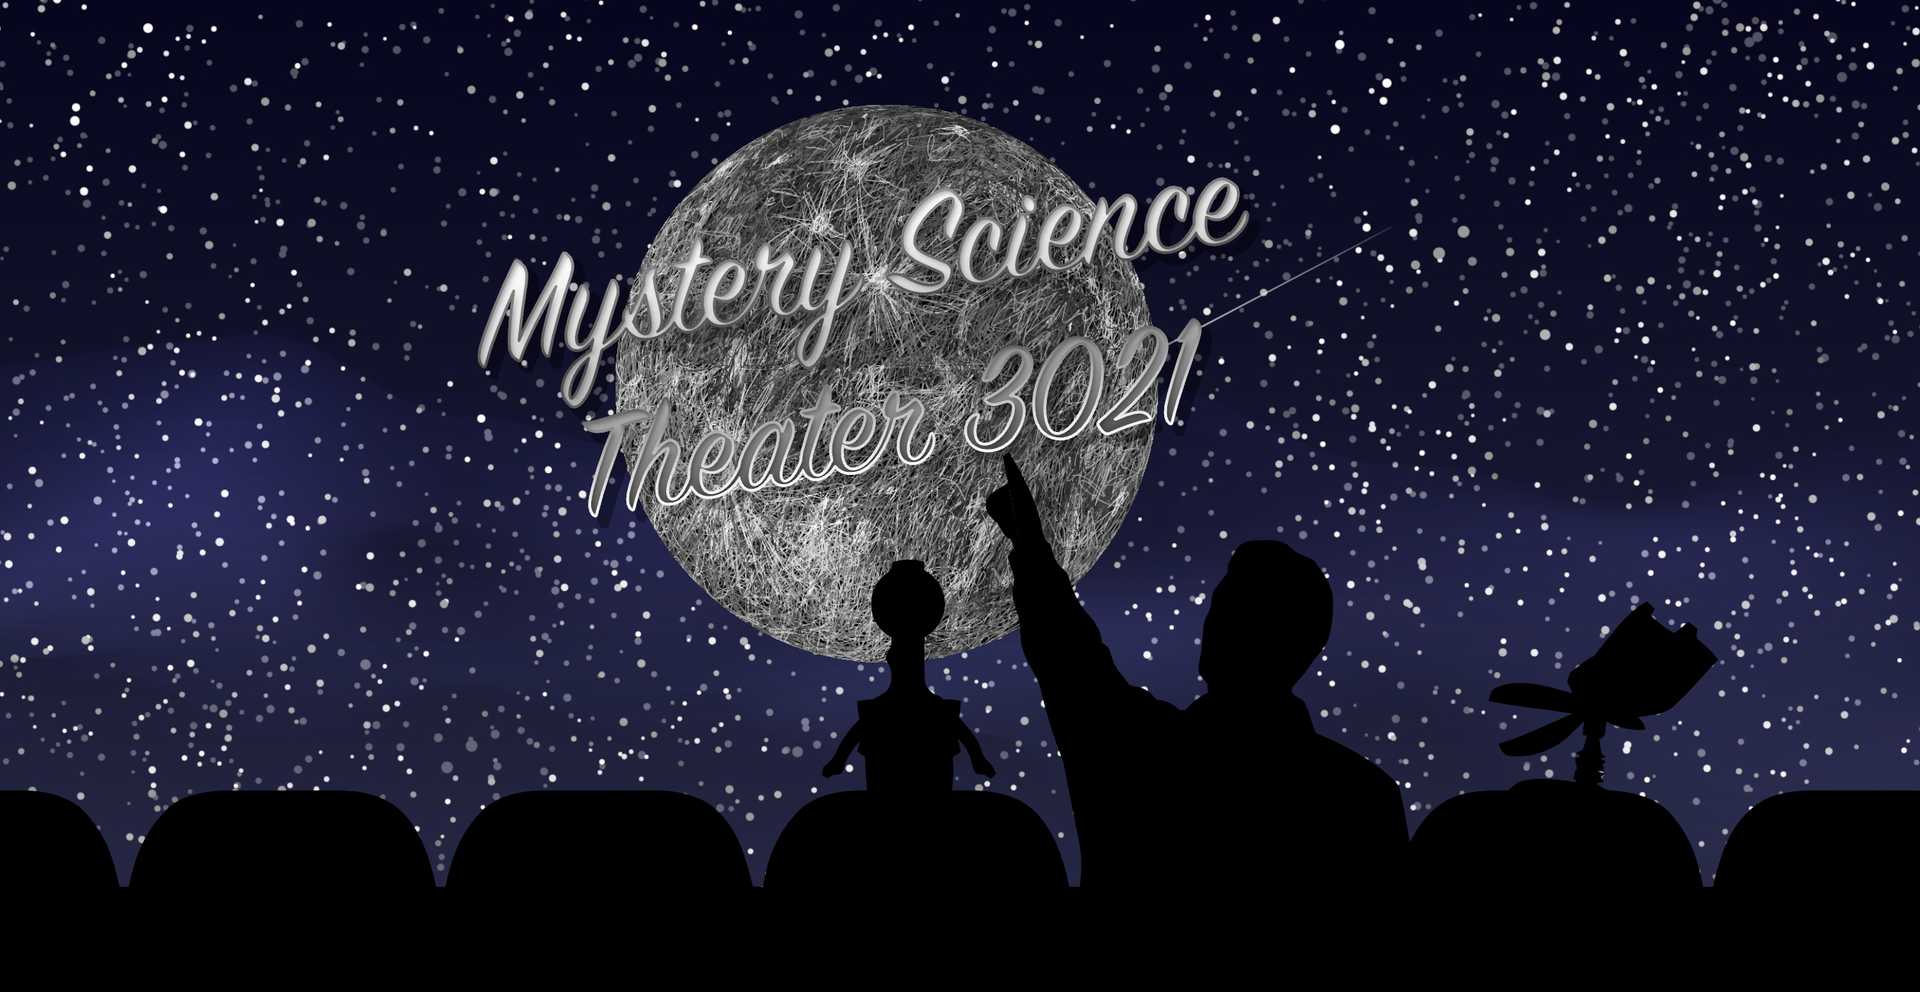 (Video Blog Example) Mystery Science Theater 3021 - A great way to show off what the VidSocks platform allows you to do. Interactive multimedia blog posts - it's new, we invented it :-) - Featured image